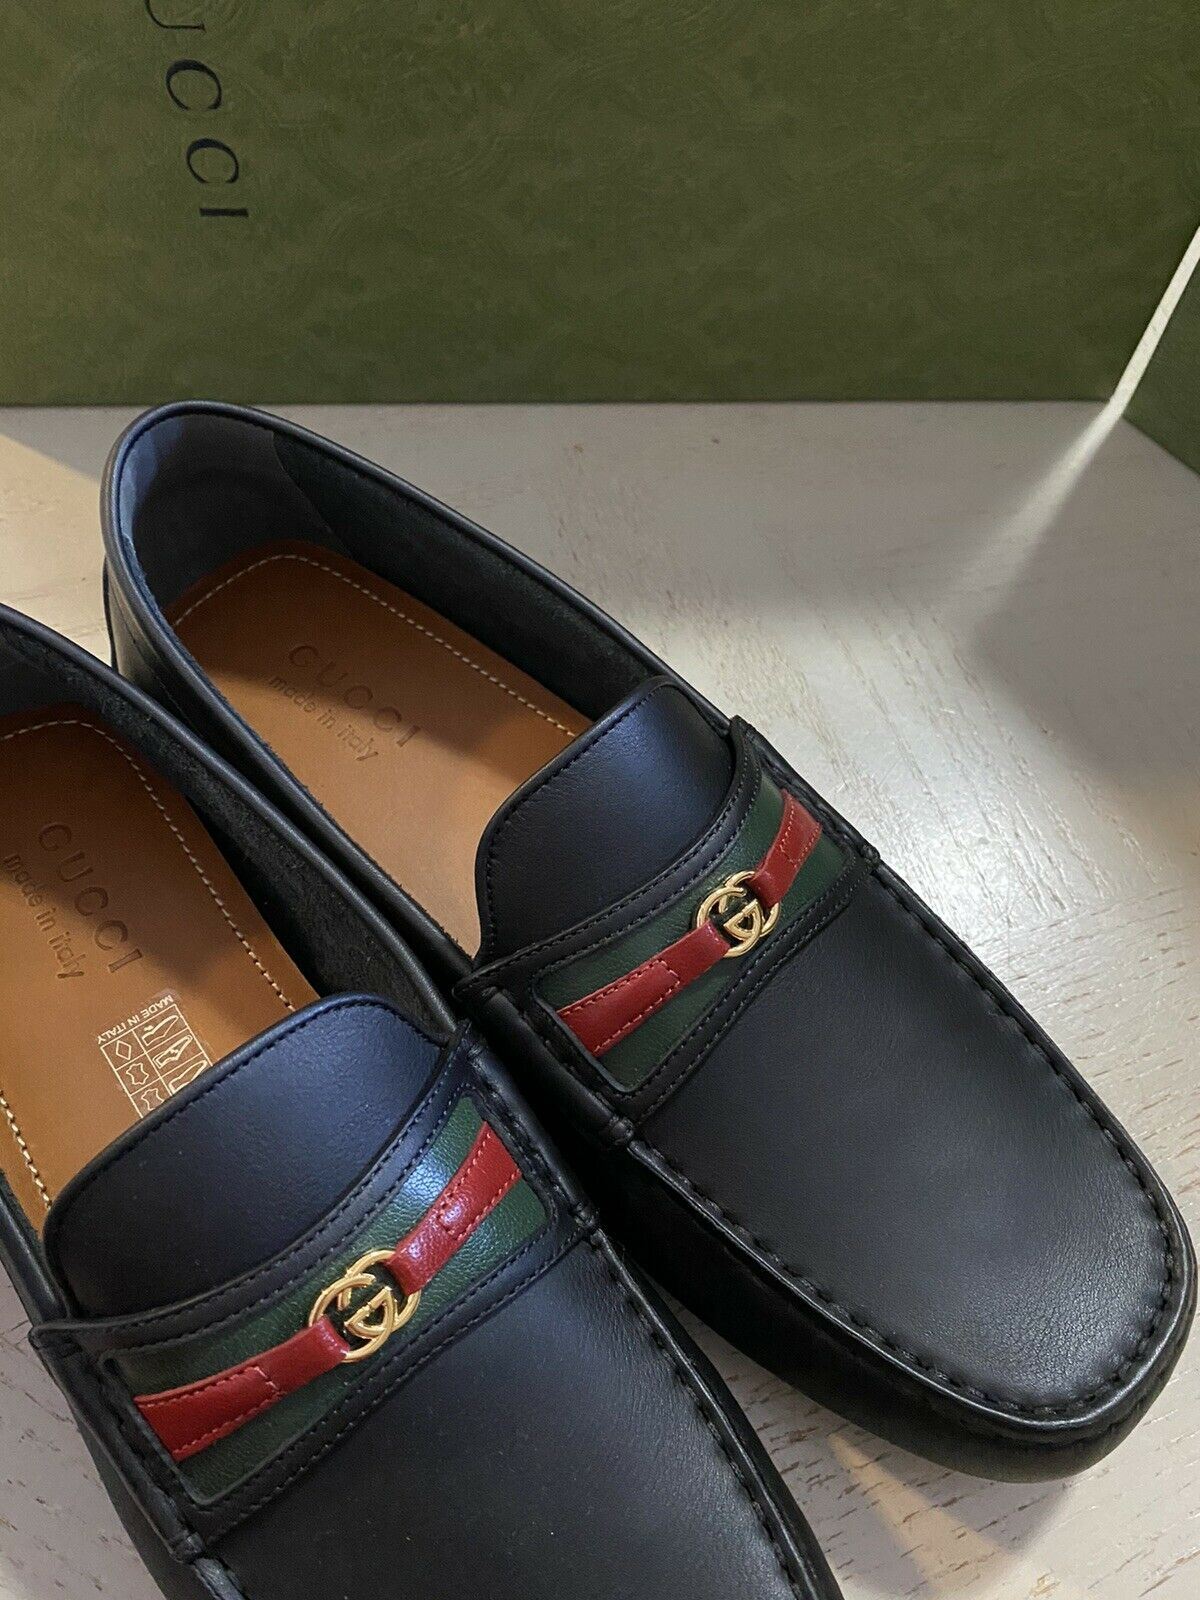 New Gucci Men’s GG Leather Driver Loafers Shoes Black 9 US ( 10 UK ) Italy